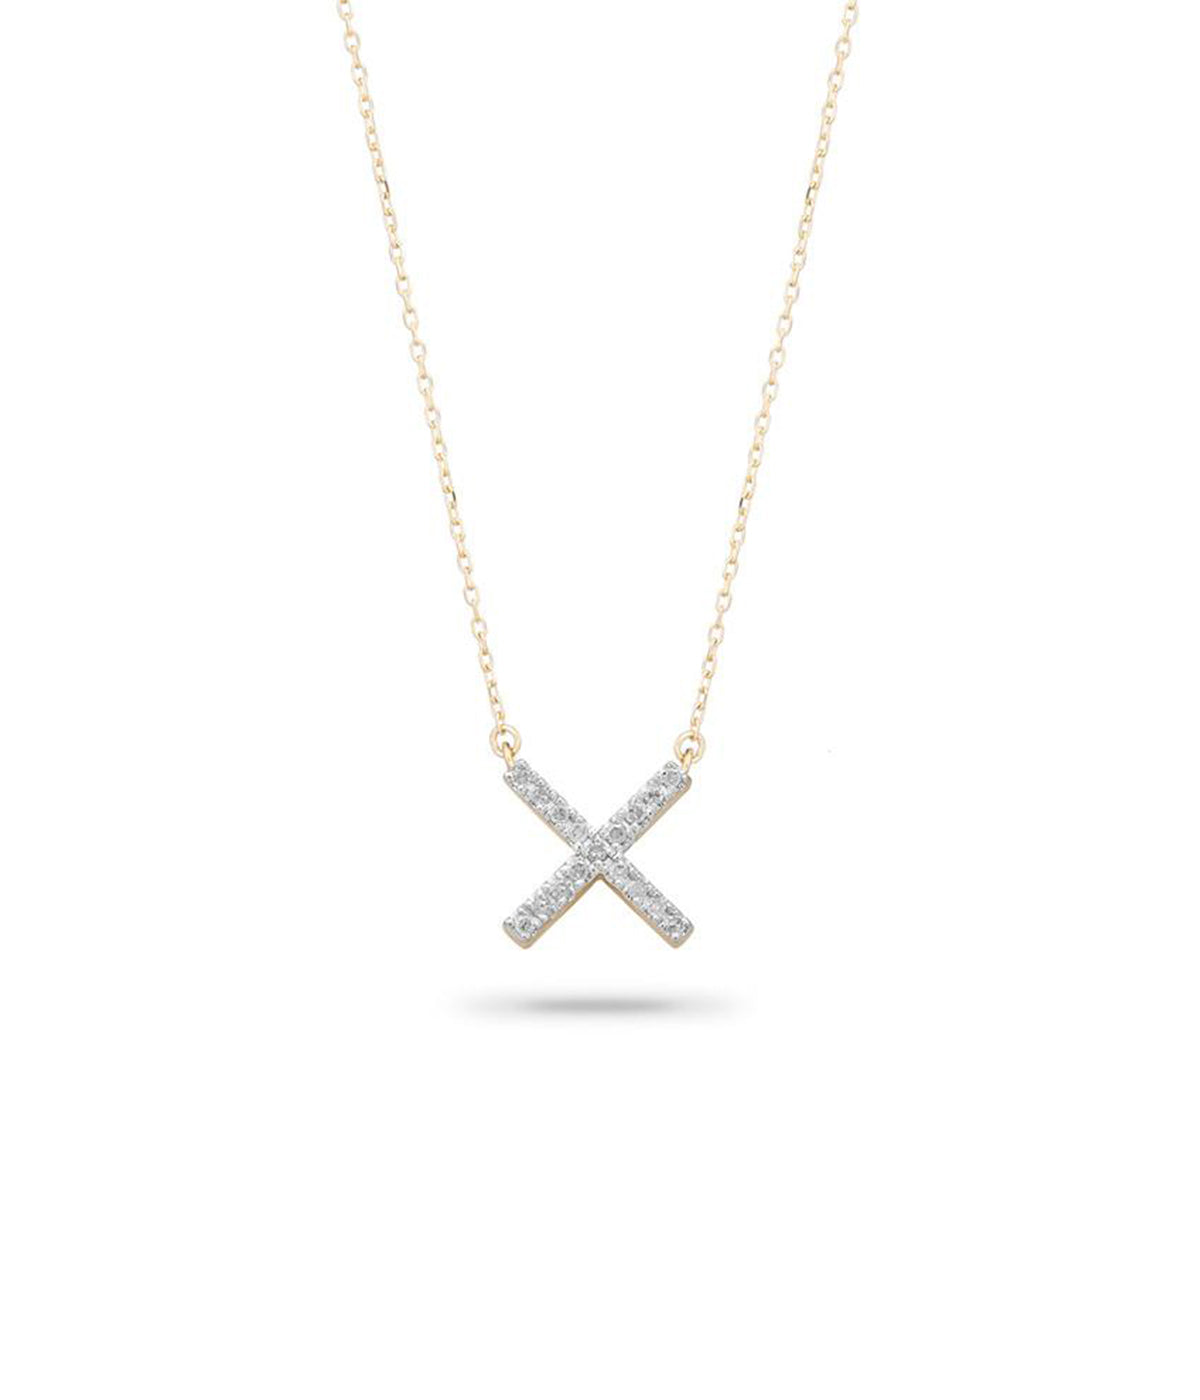 Pave X Necklace in Yellow Gold